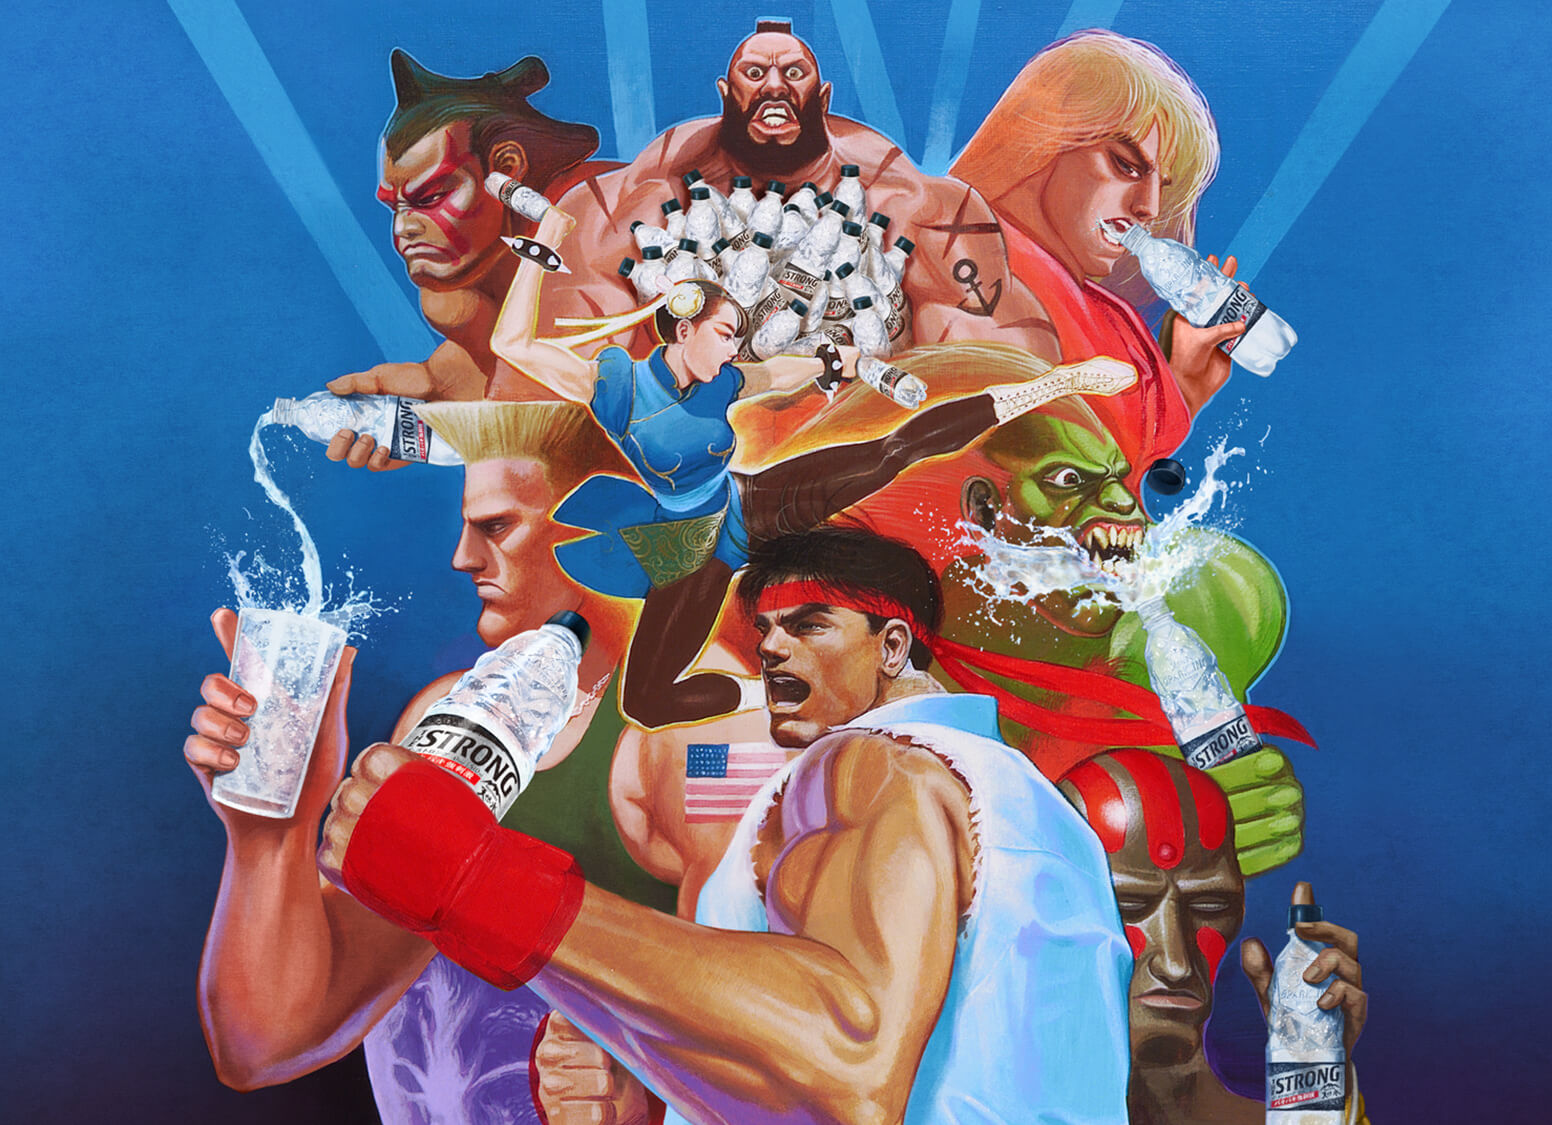 A promotional image for The Strong Fighter II collaboration between Capcom's Street Fighter II video game and Suntory's THE STRONG sparkling water product, featuring artwork of E. Honda, Zangief, Ken, Guile, Chun Li, Blanka, Ryu, and Dhalsim enjoying refreshing bottles of THE STRONG sparkling water.